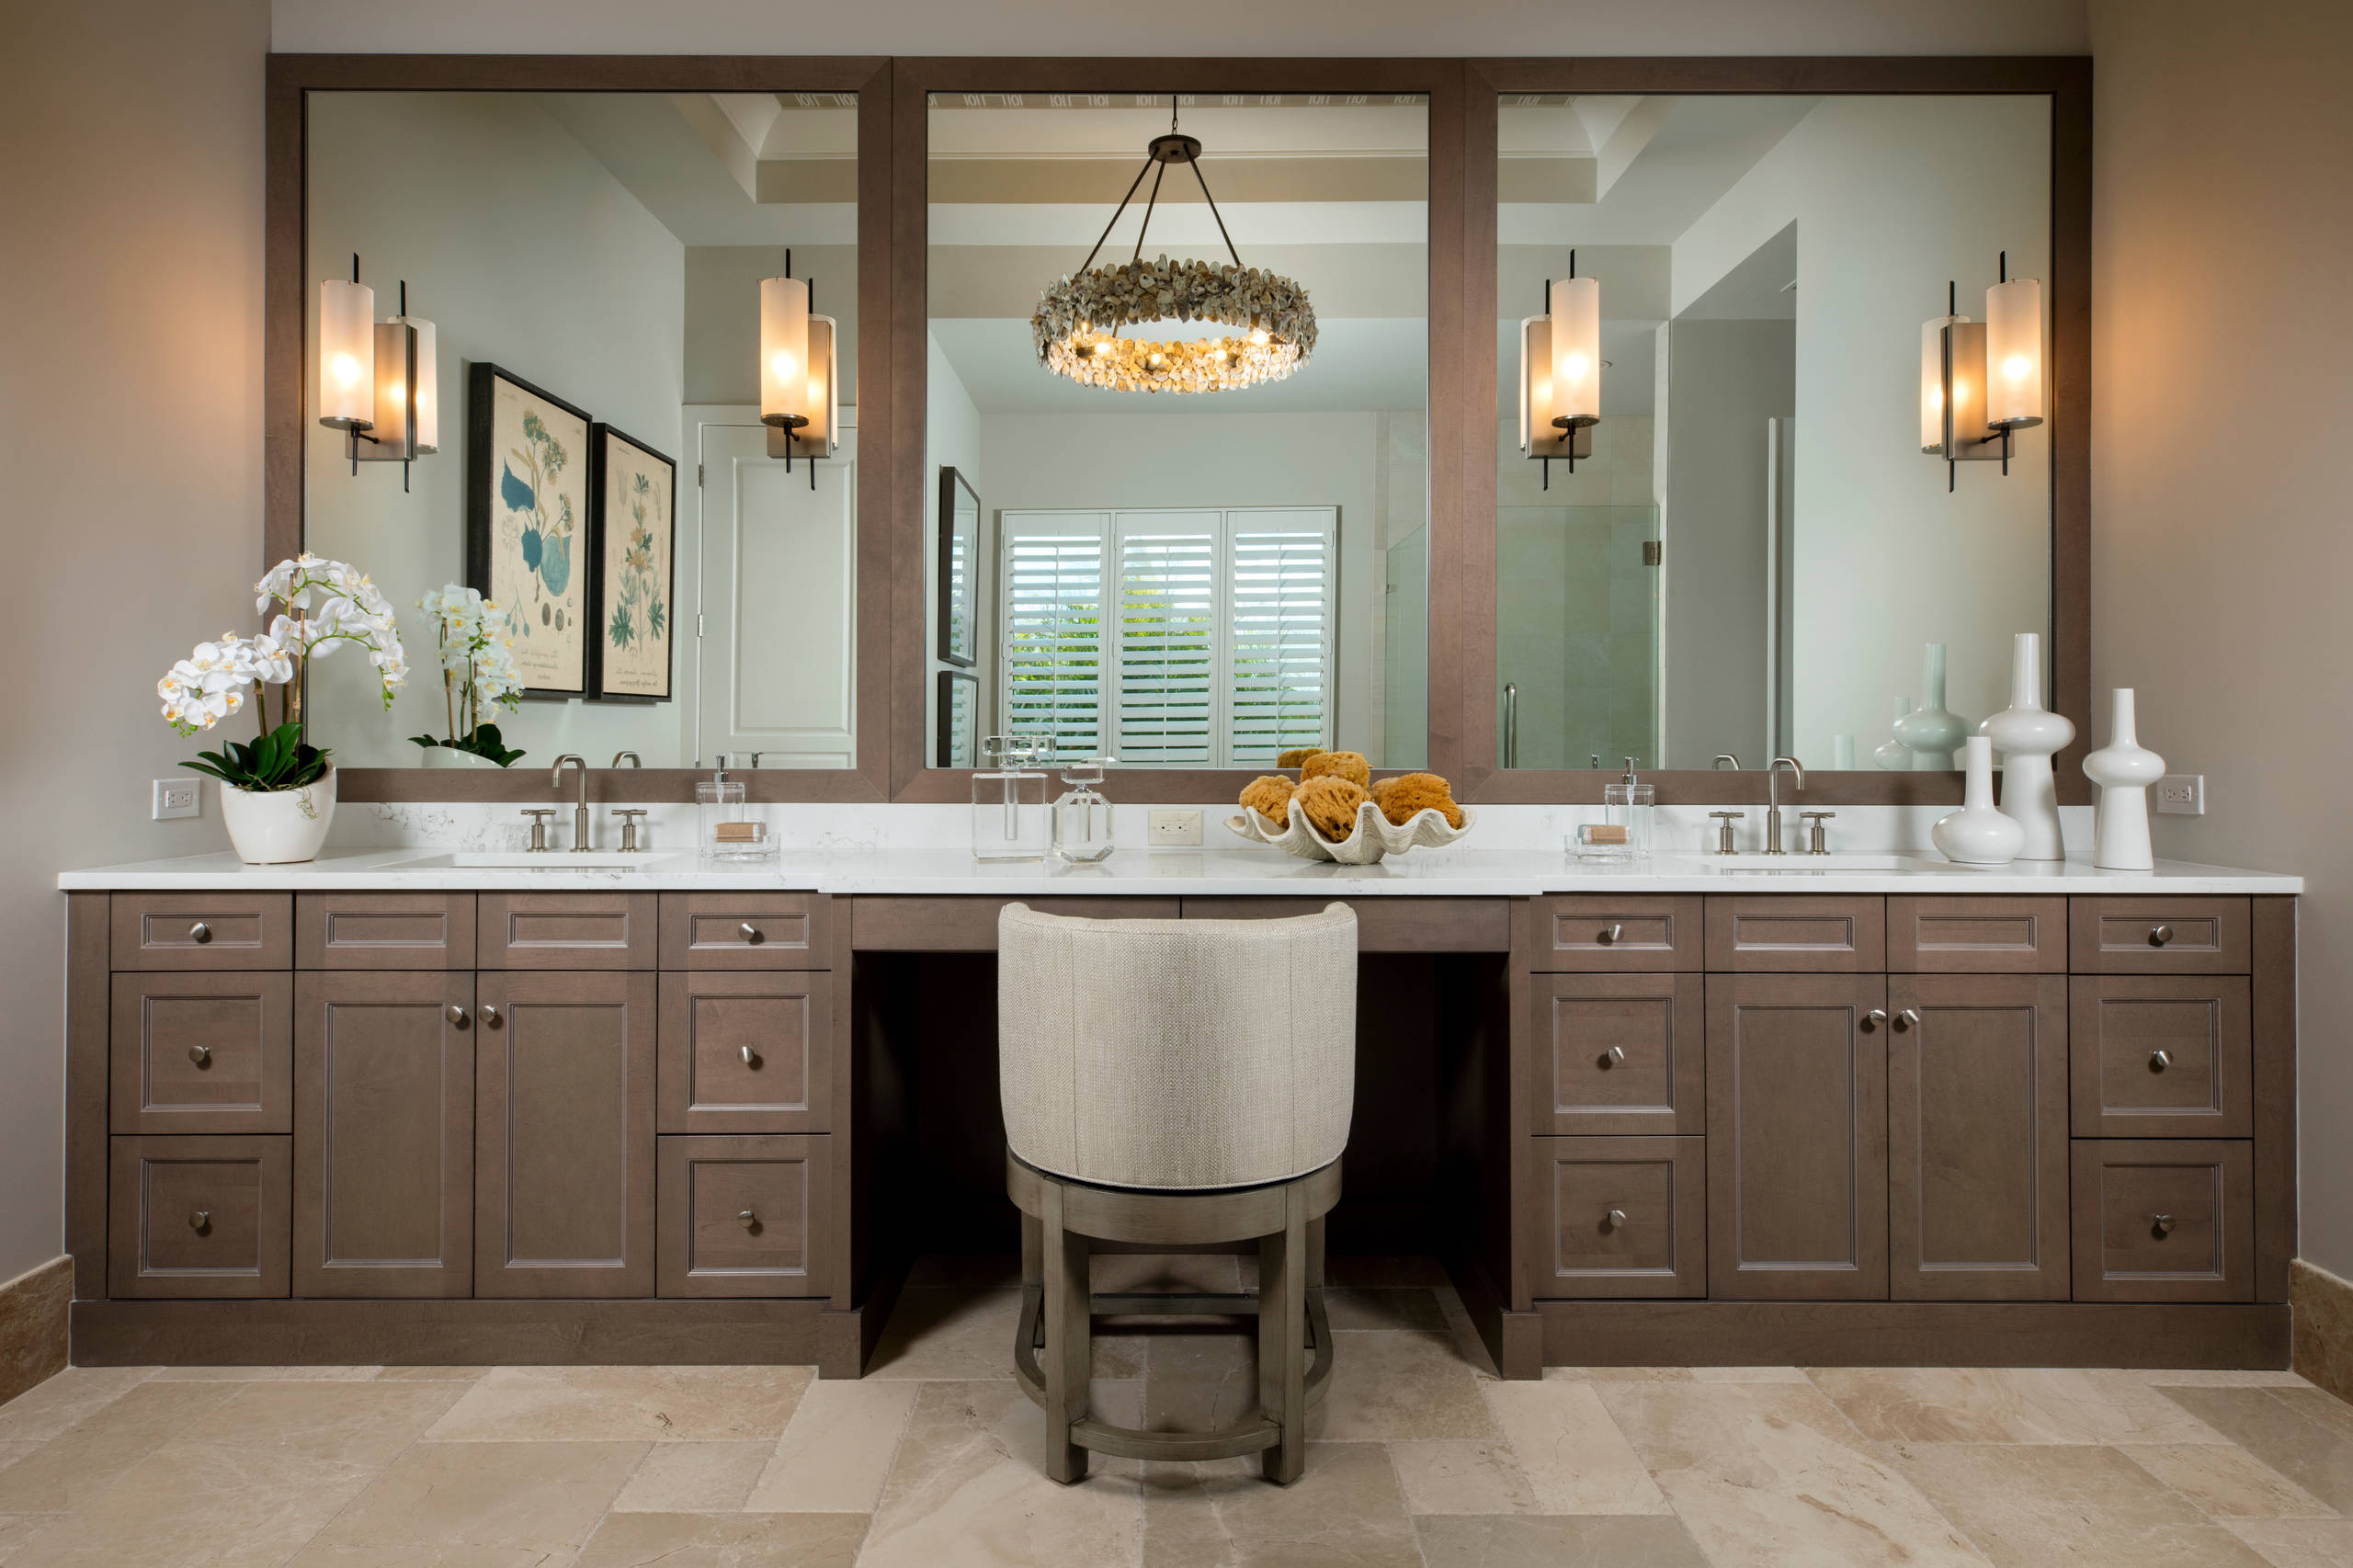 18 Bathroom with Brown Cabinets Ideas You'll Love   October, 18 ...